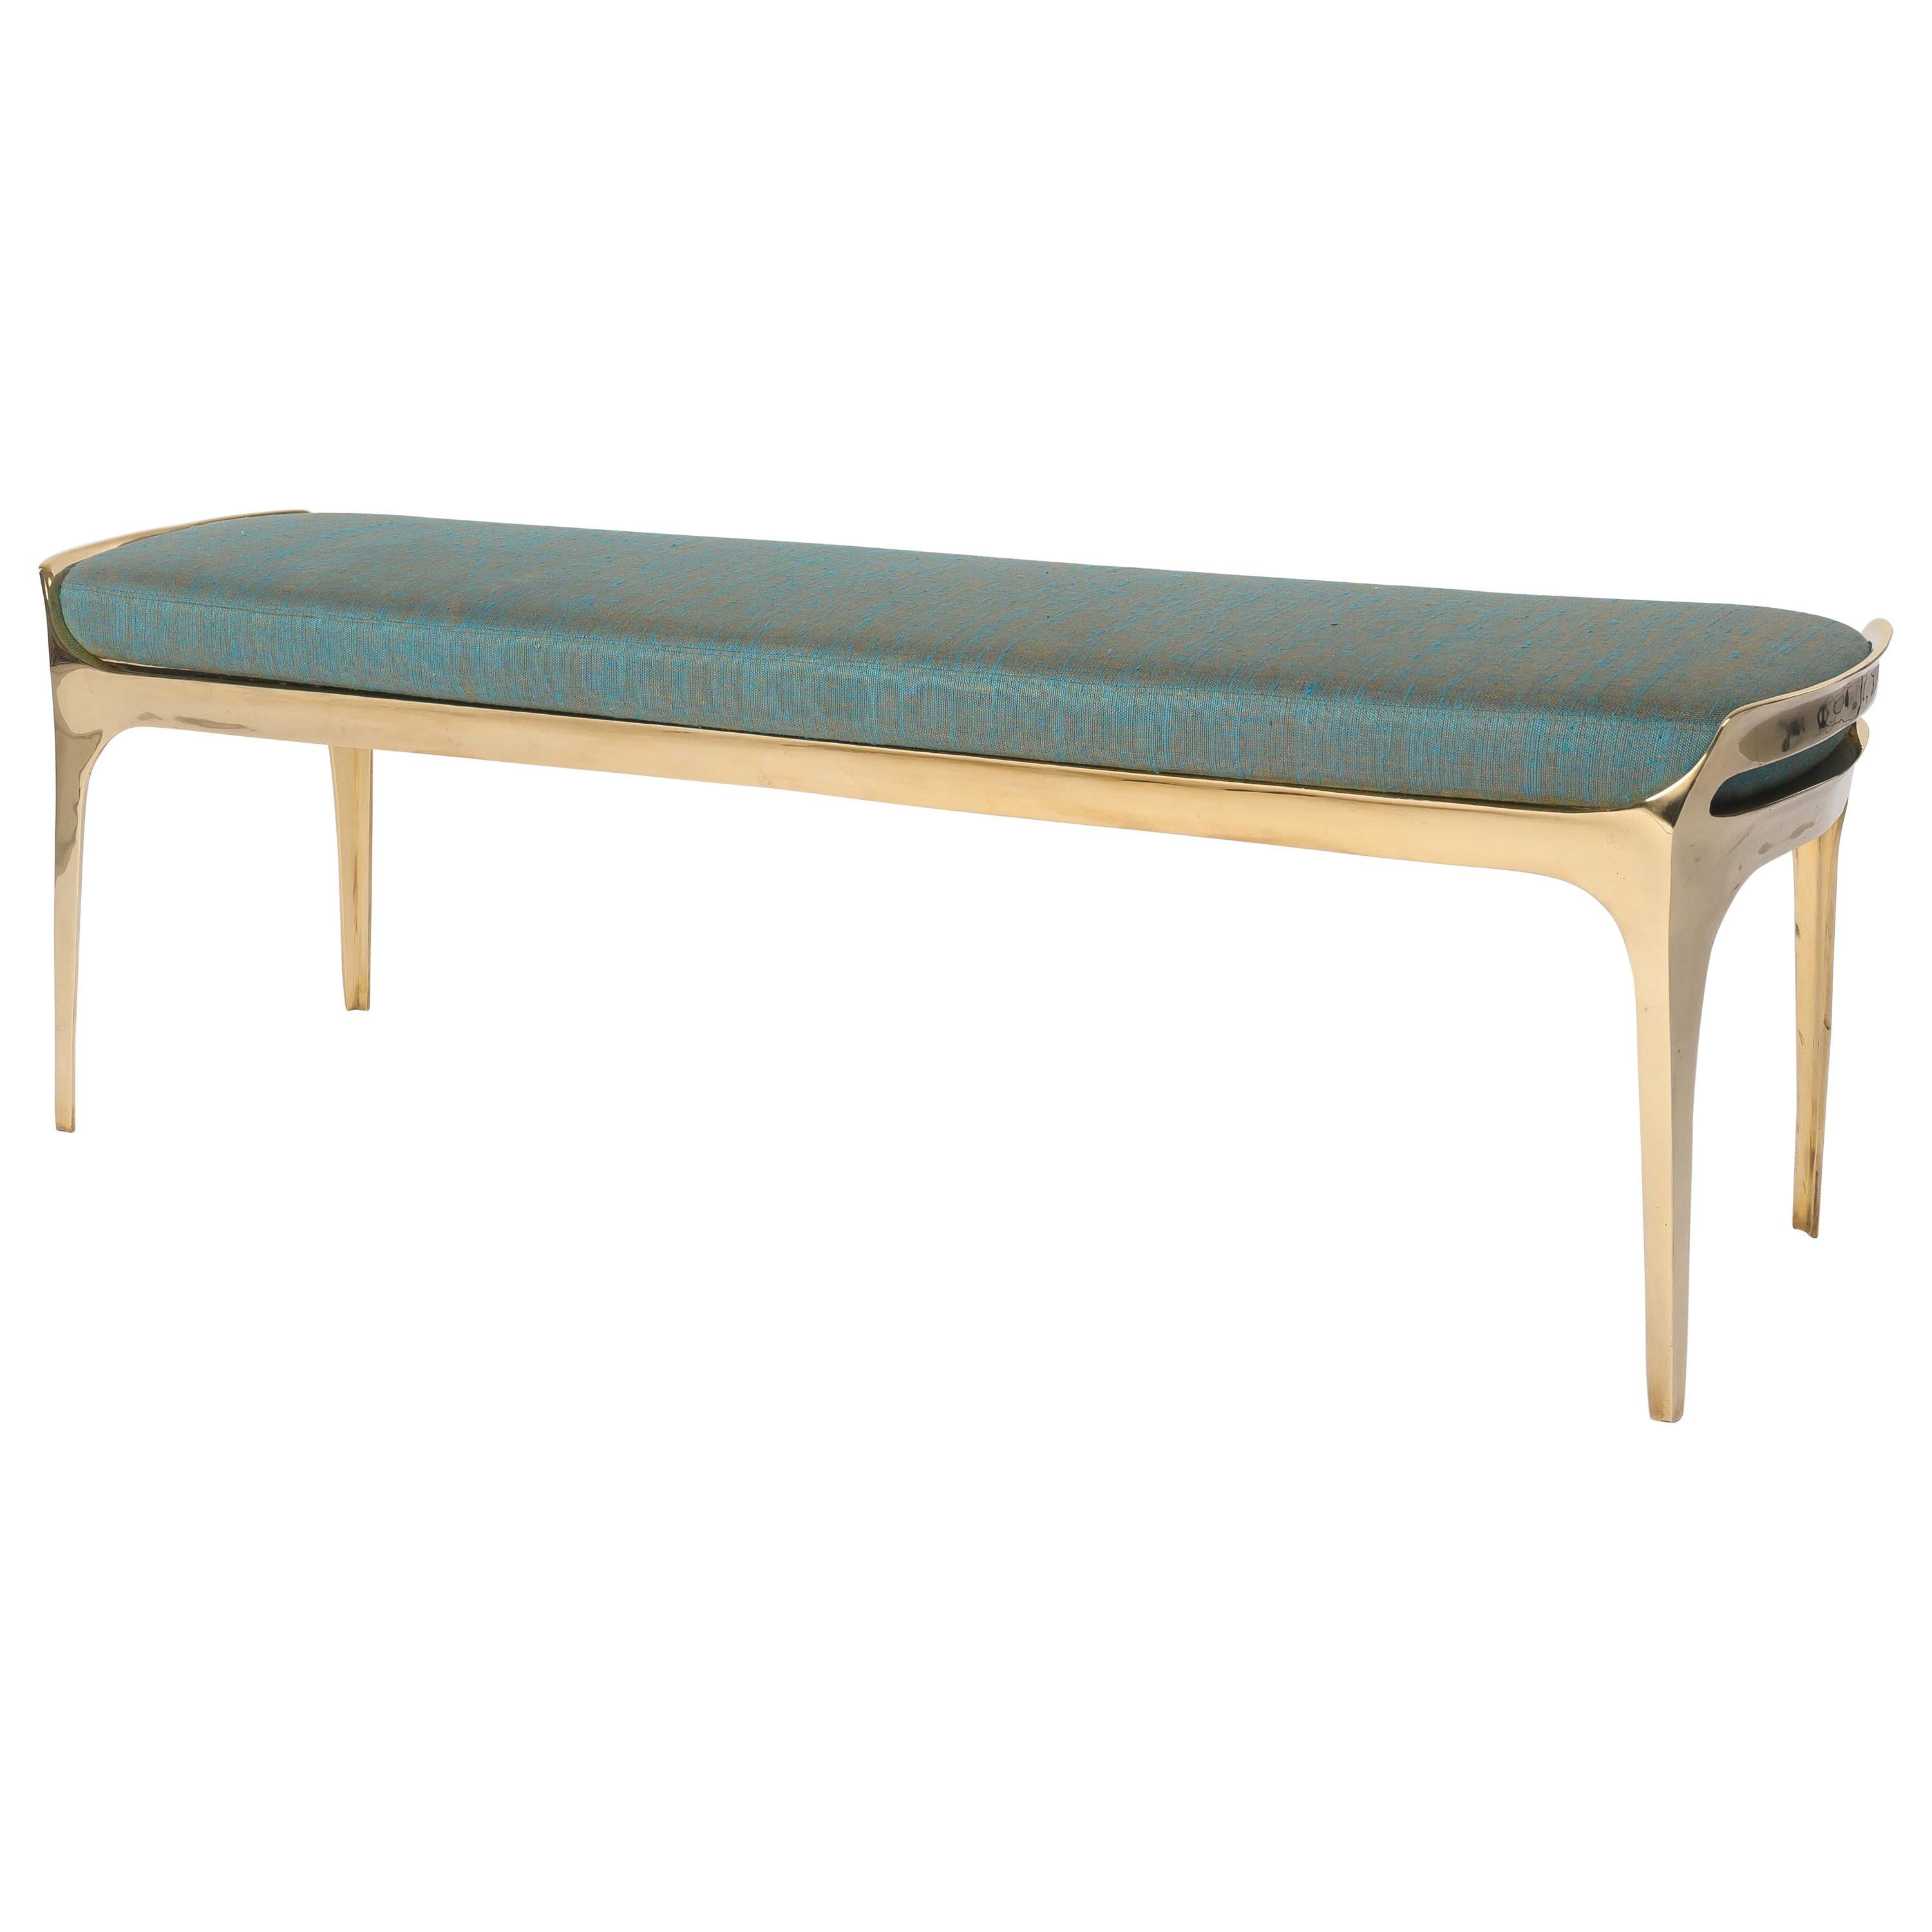 In Stock Cast Bronze Bruda Bench in Polished Gold Bronze by Elan Atelier